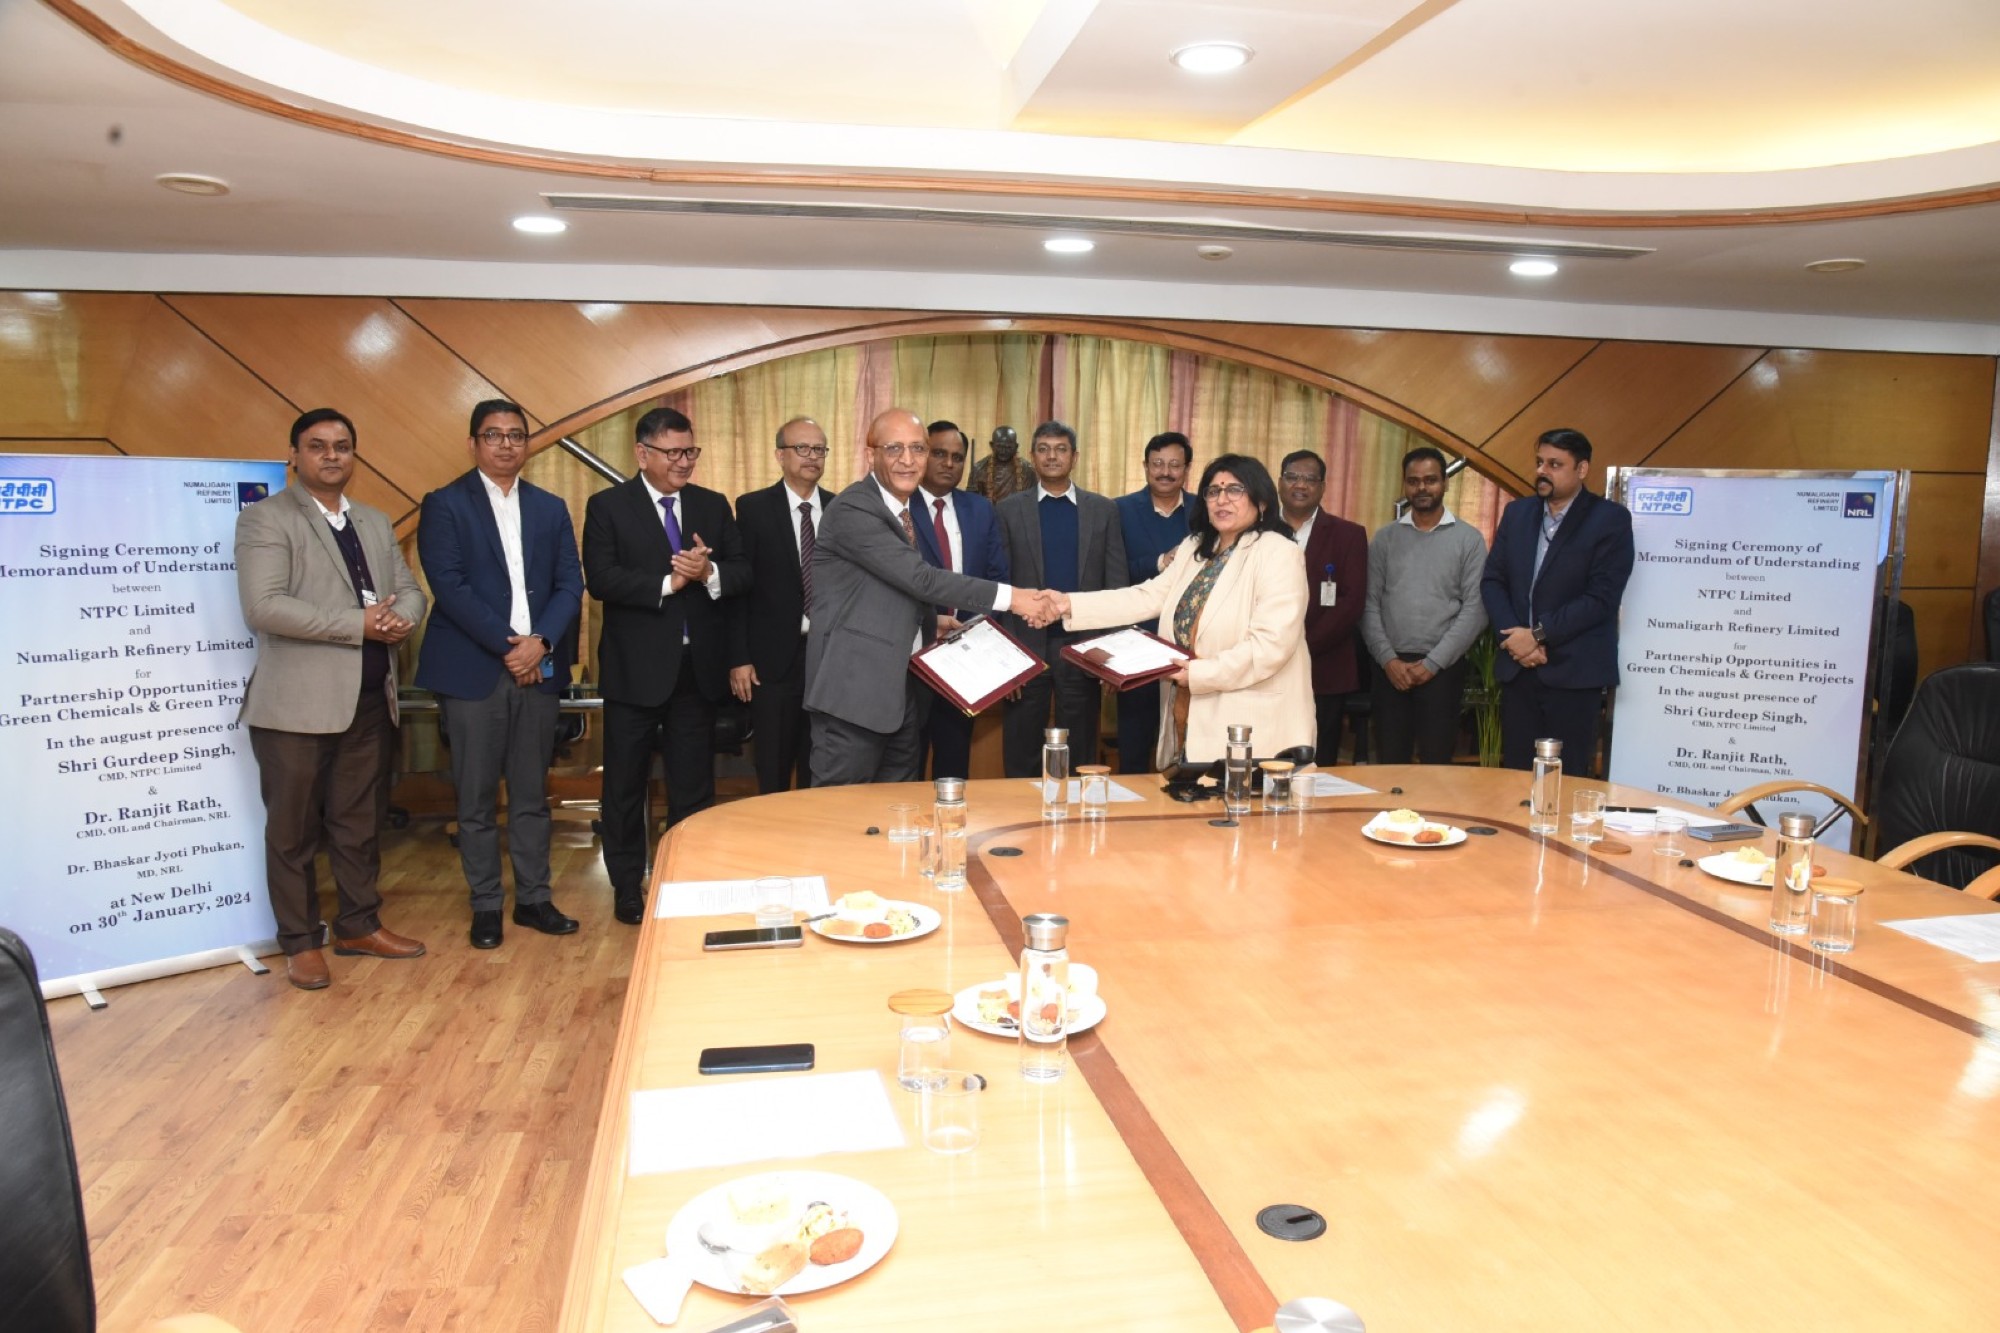 NTPC and NRL partner up for green chemicals & green projects